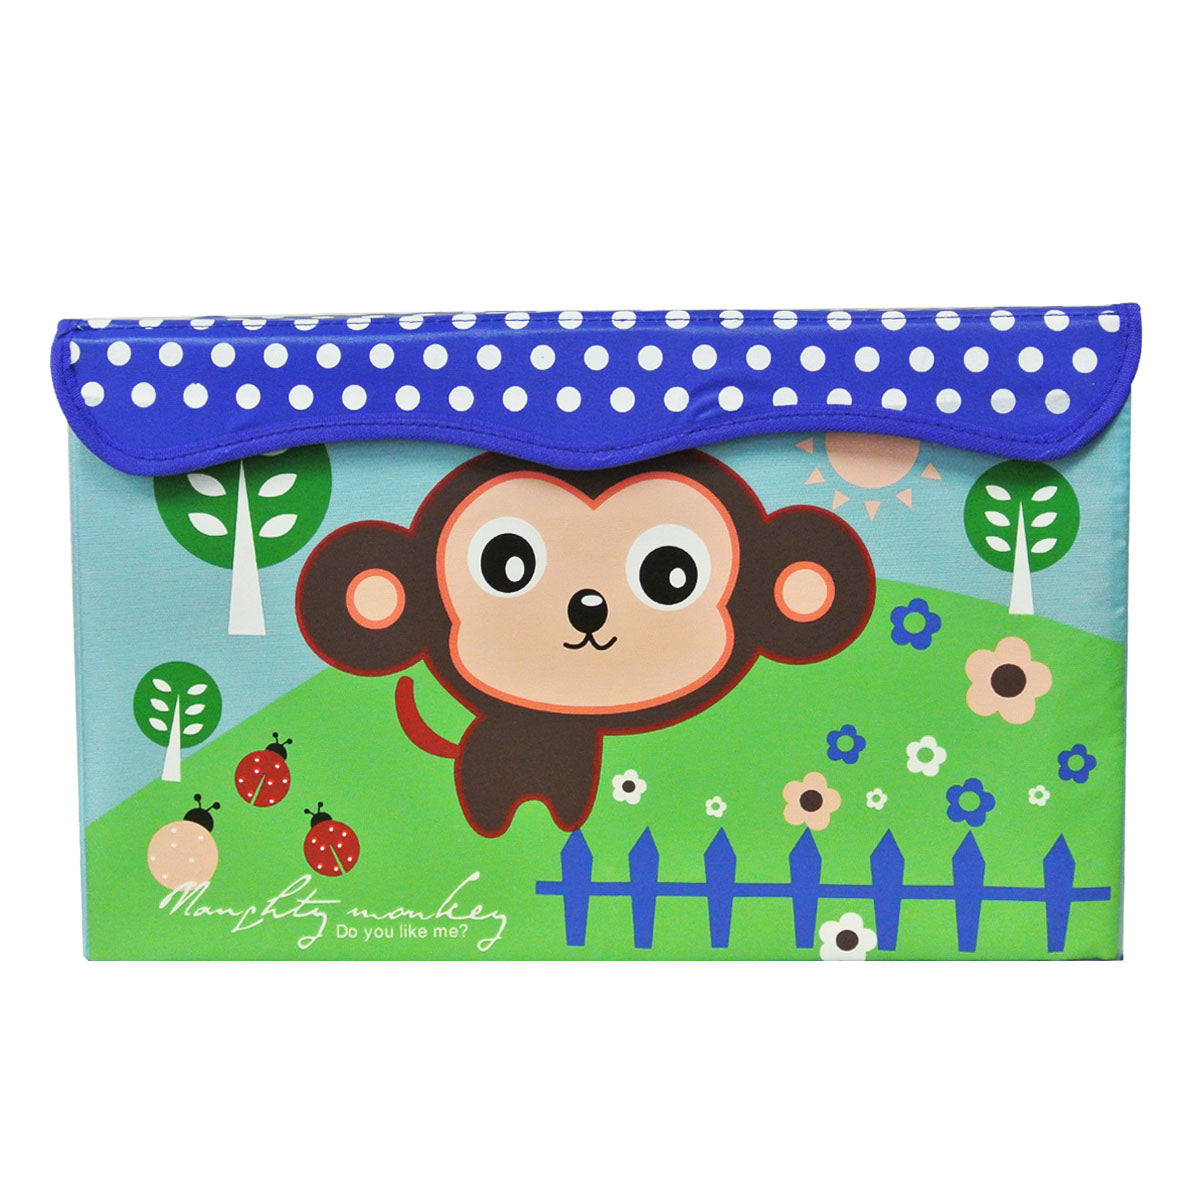 Children's Monkey Storage Organizer for Toys and Clothes